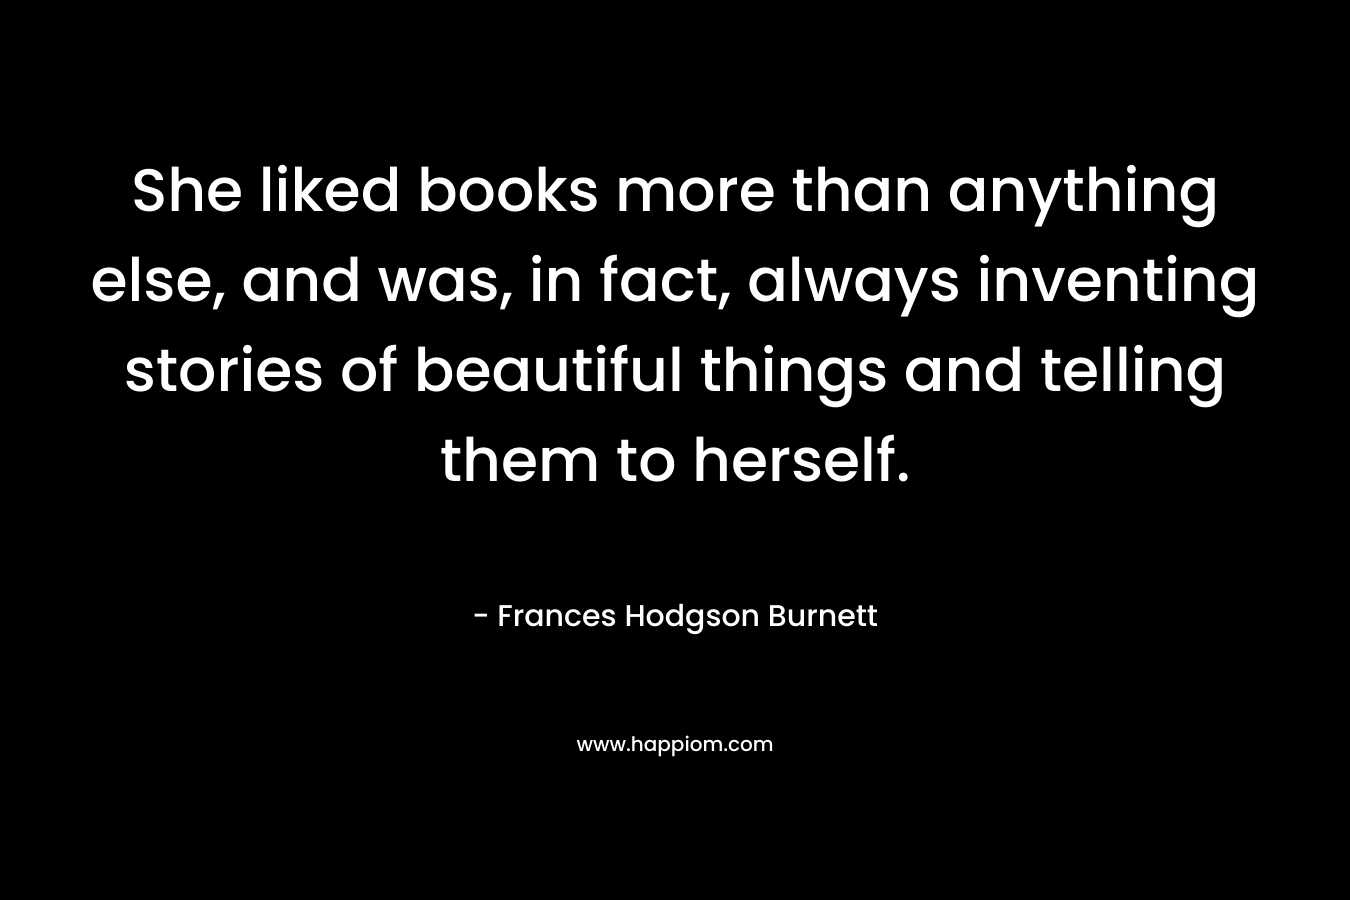 She liked books more than anything else, and was, in fact, always inventing stories of beautiful things and telling them to herself.